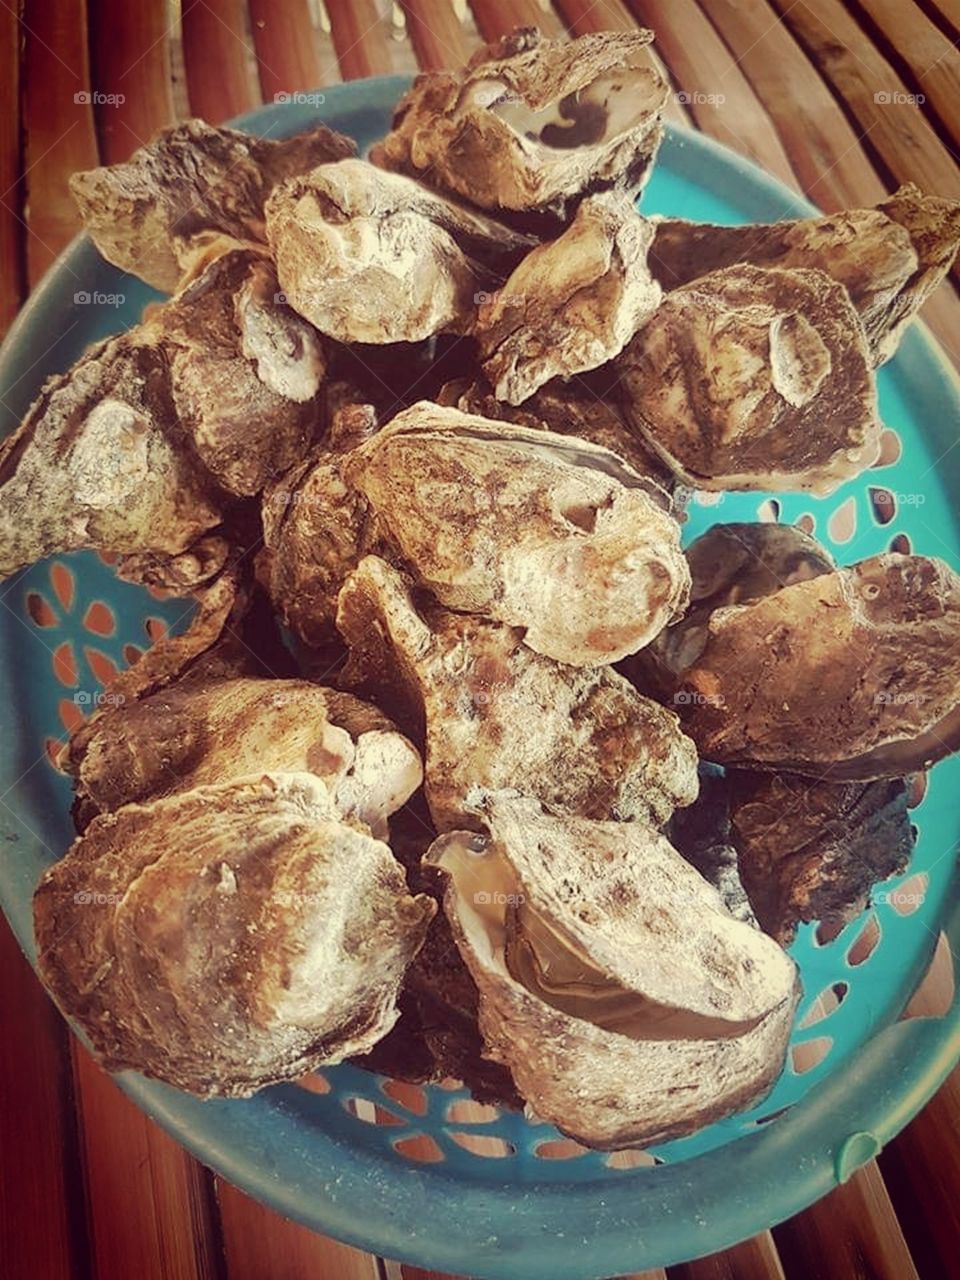 The Aphrodisiacs, "Oysters."